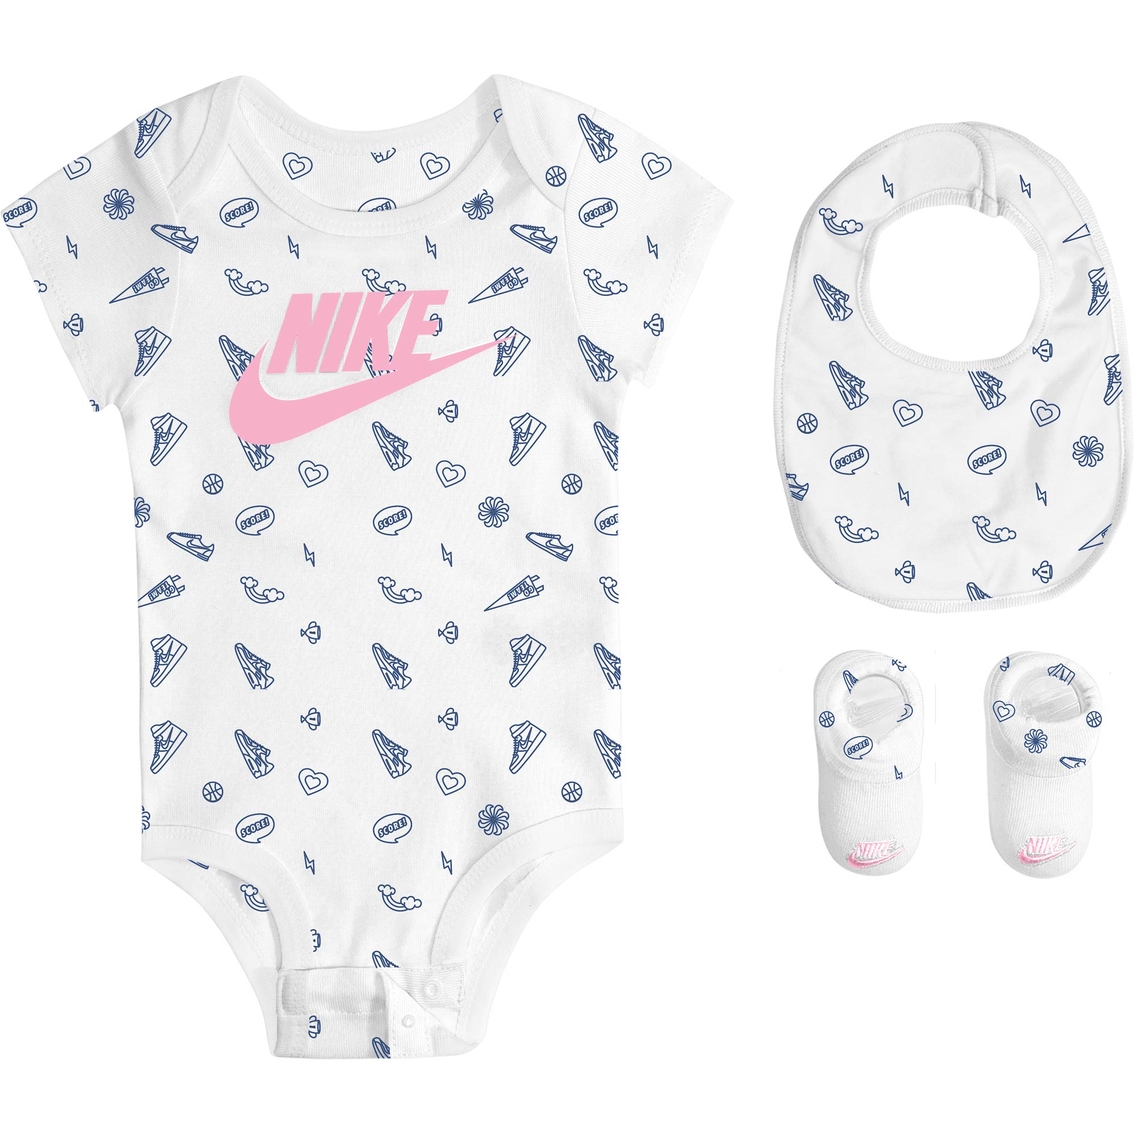 infant nike outfit girl